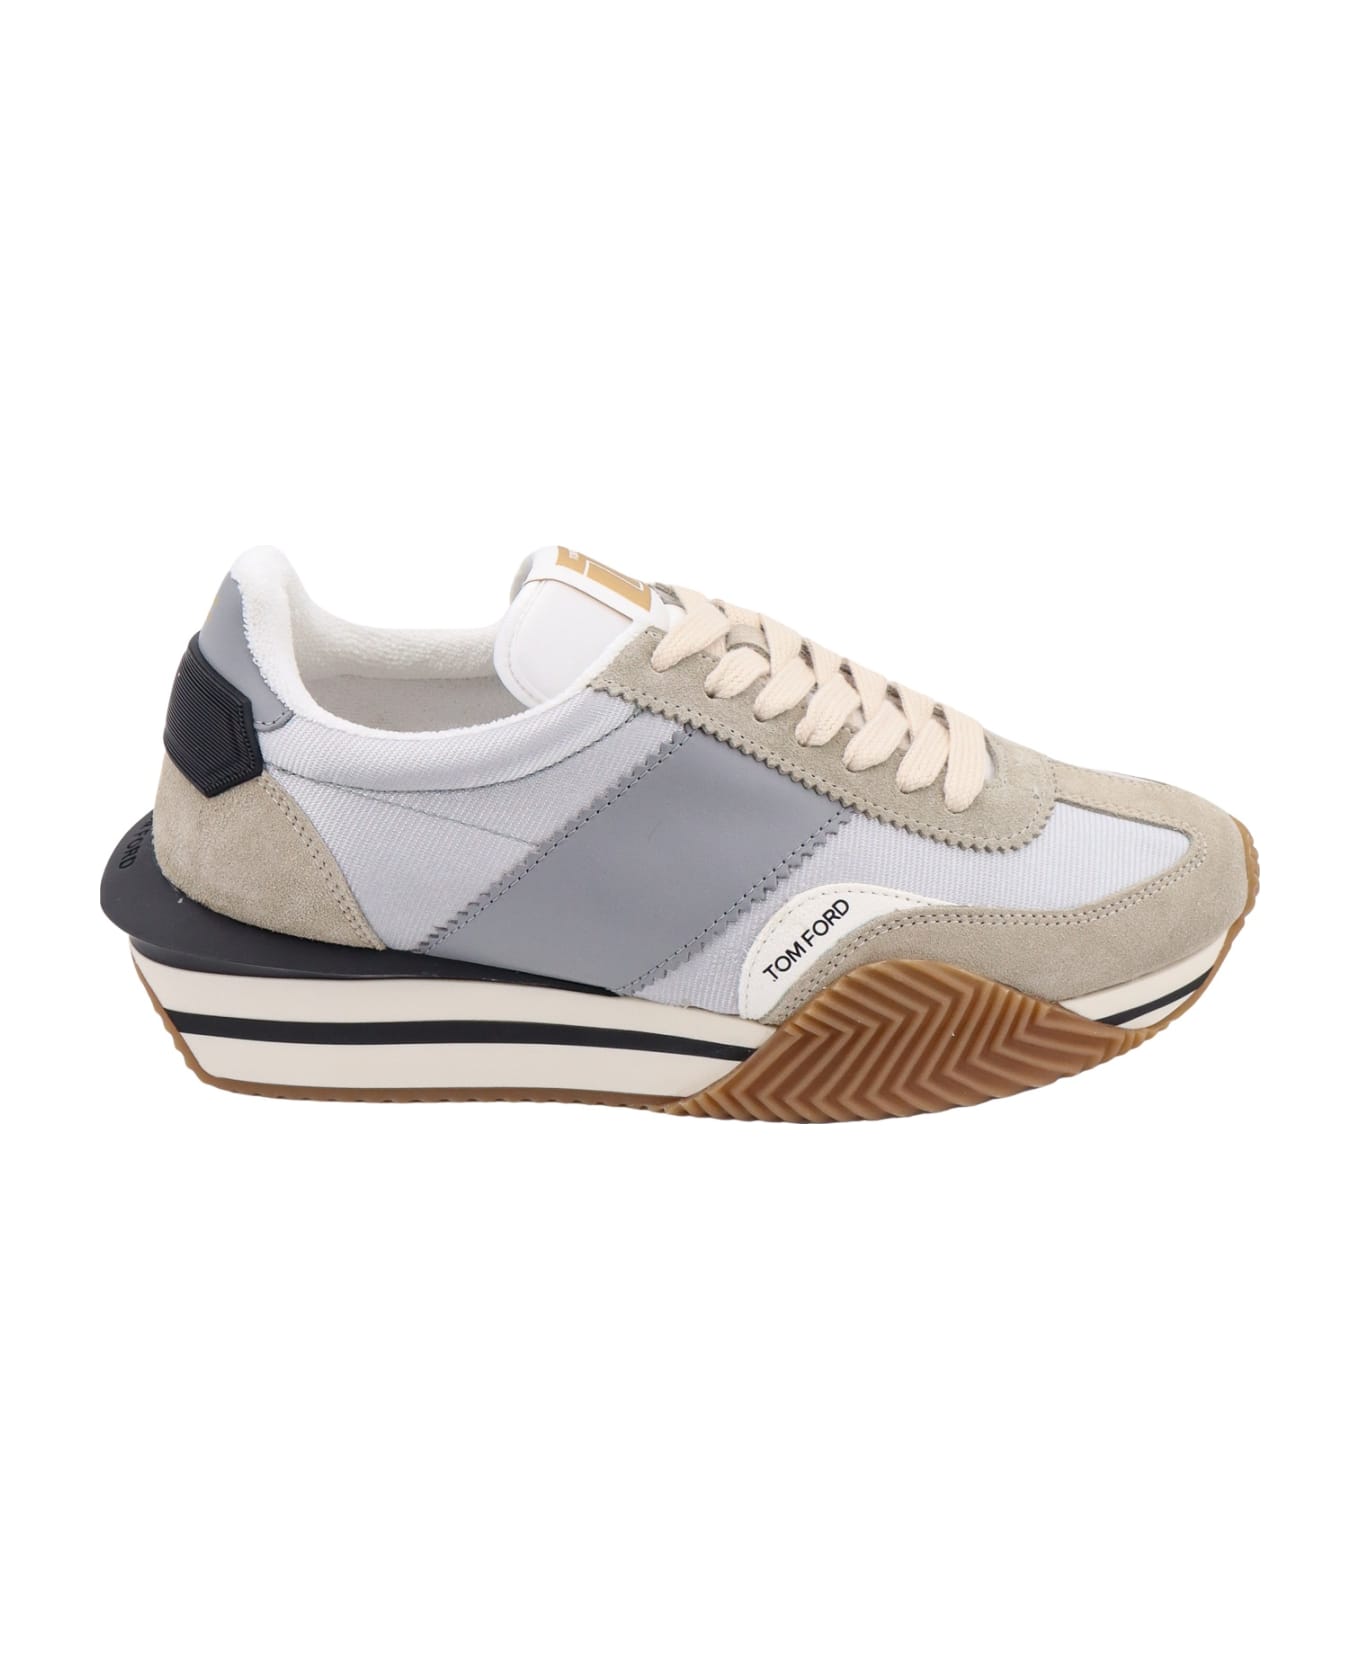 Tom Ford Sneakers - Grey